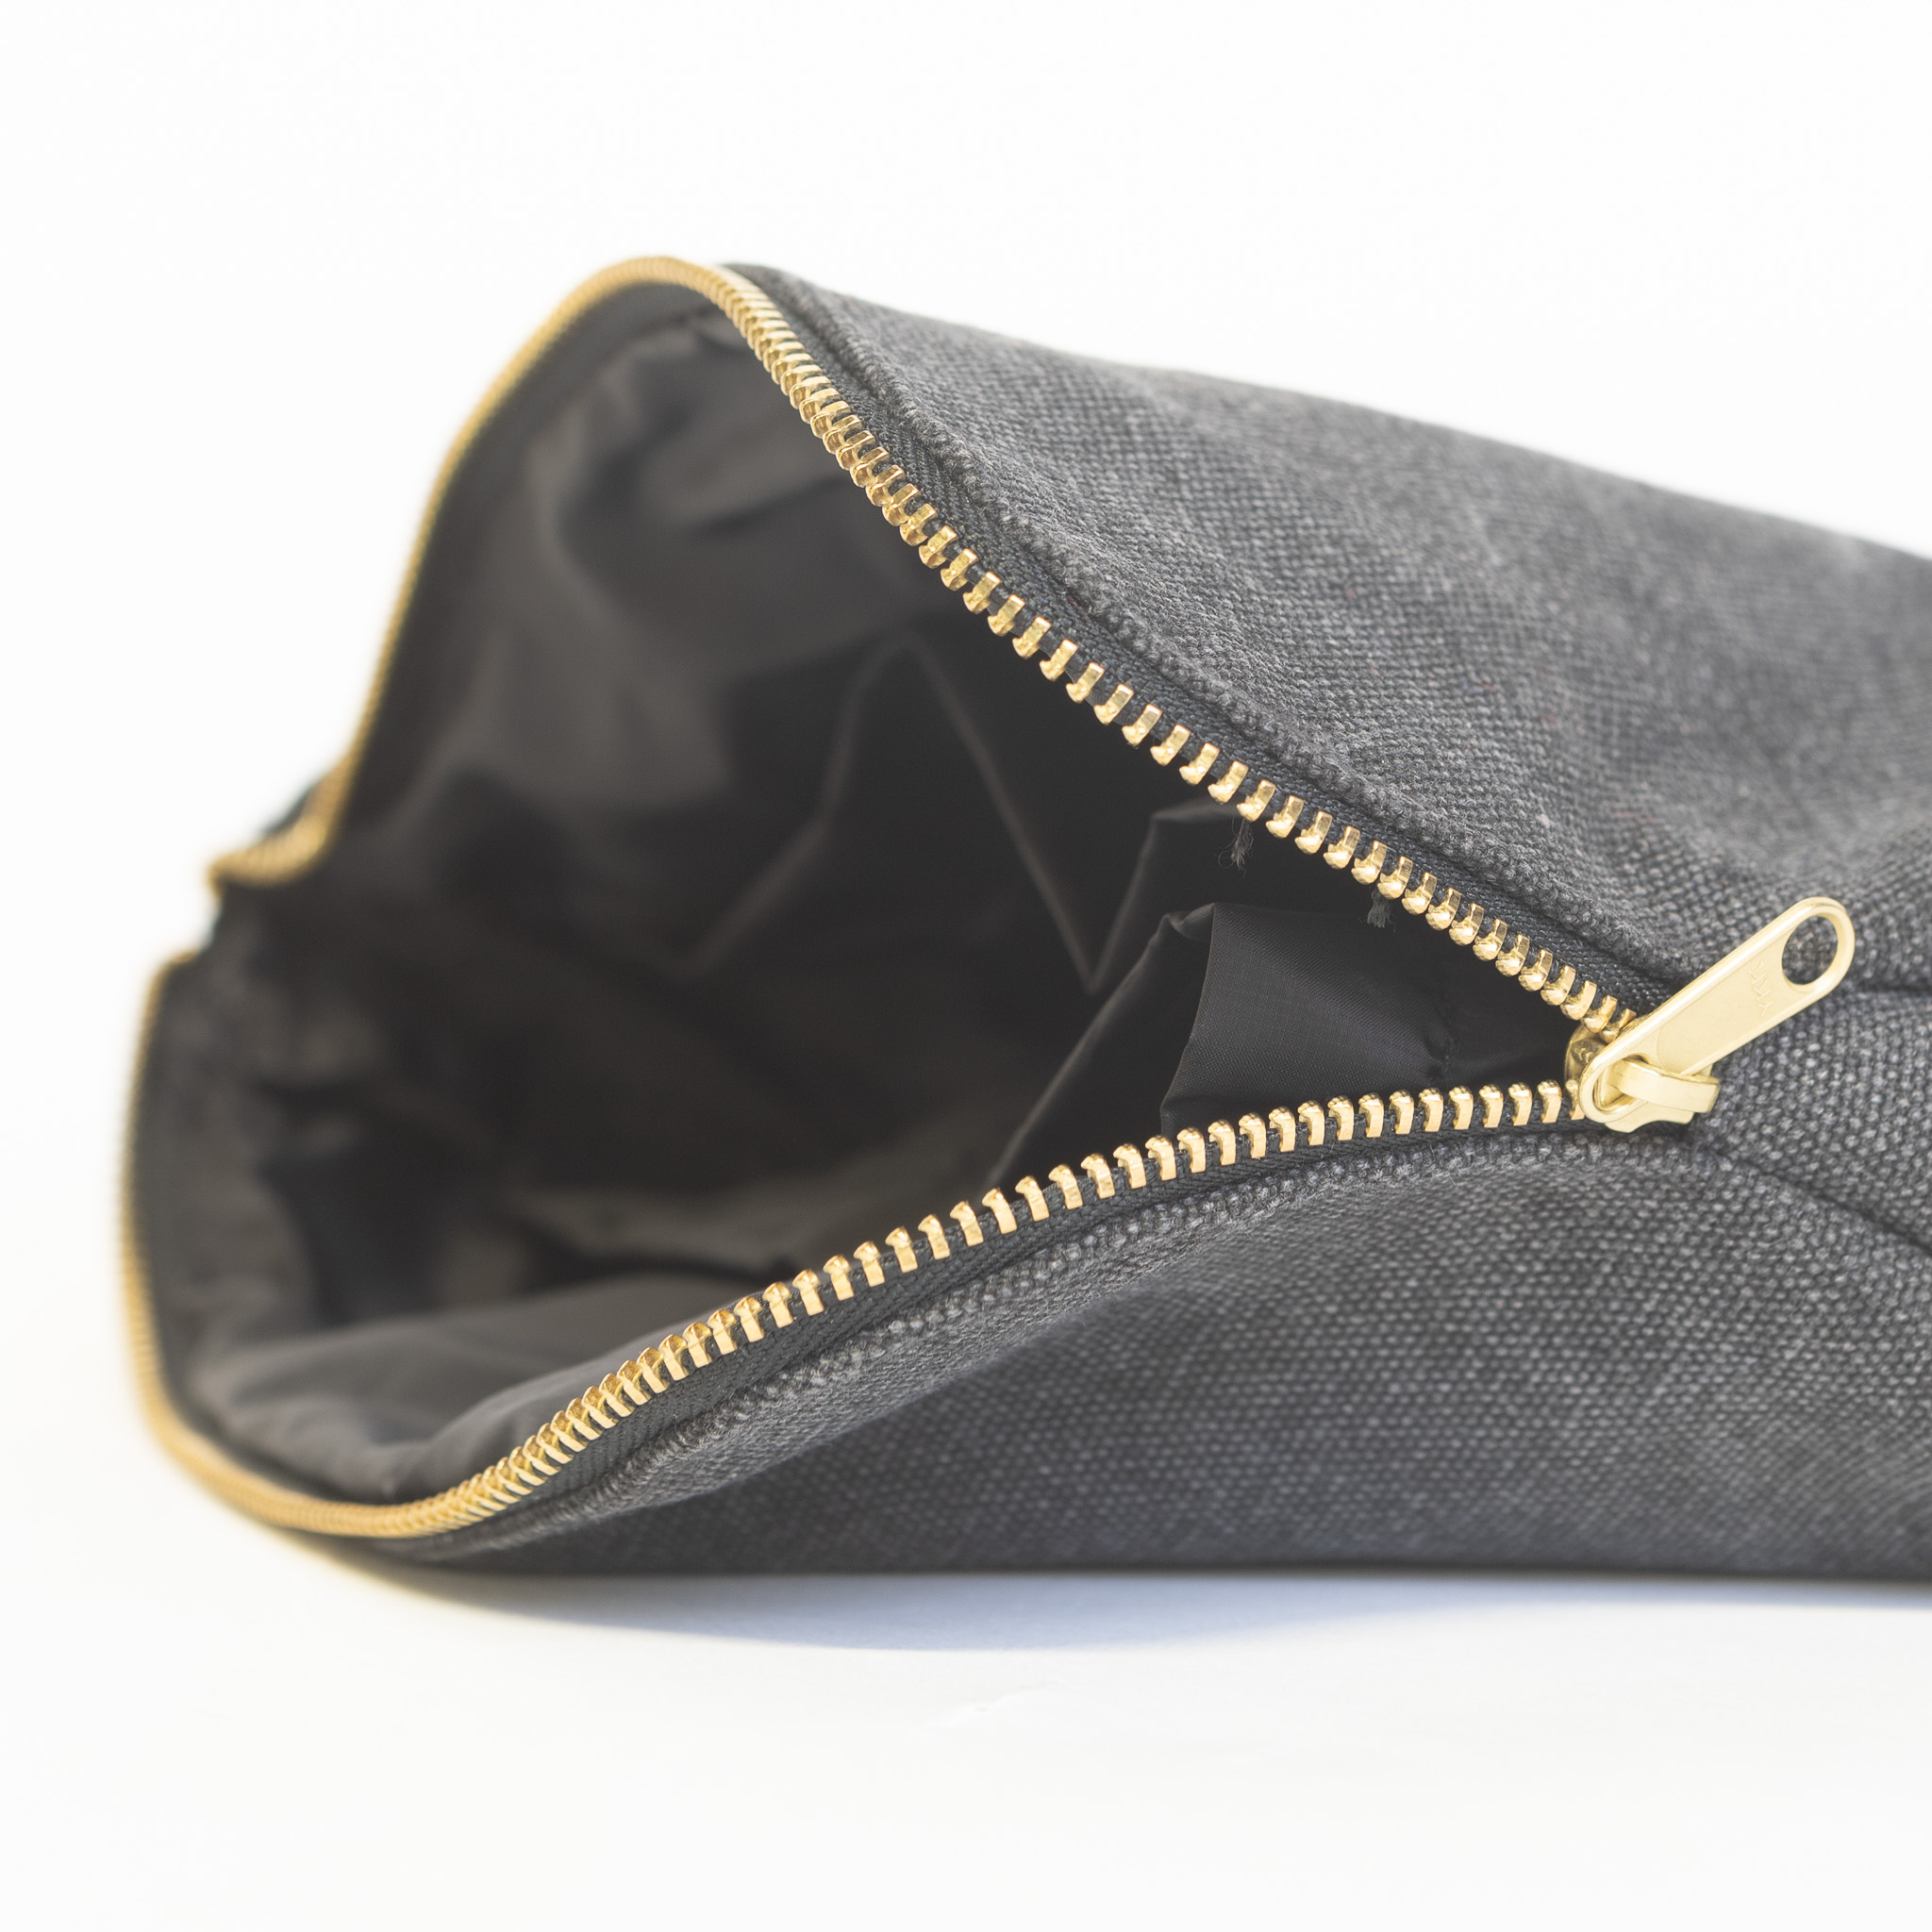 The McKinnley Stone Washed Canvas Pouch